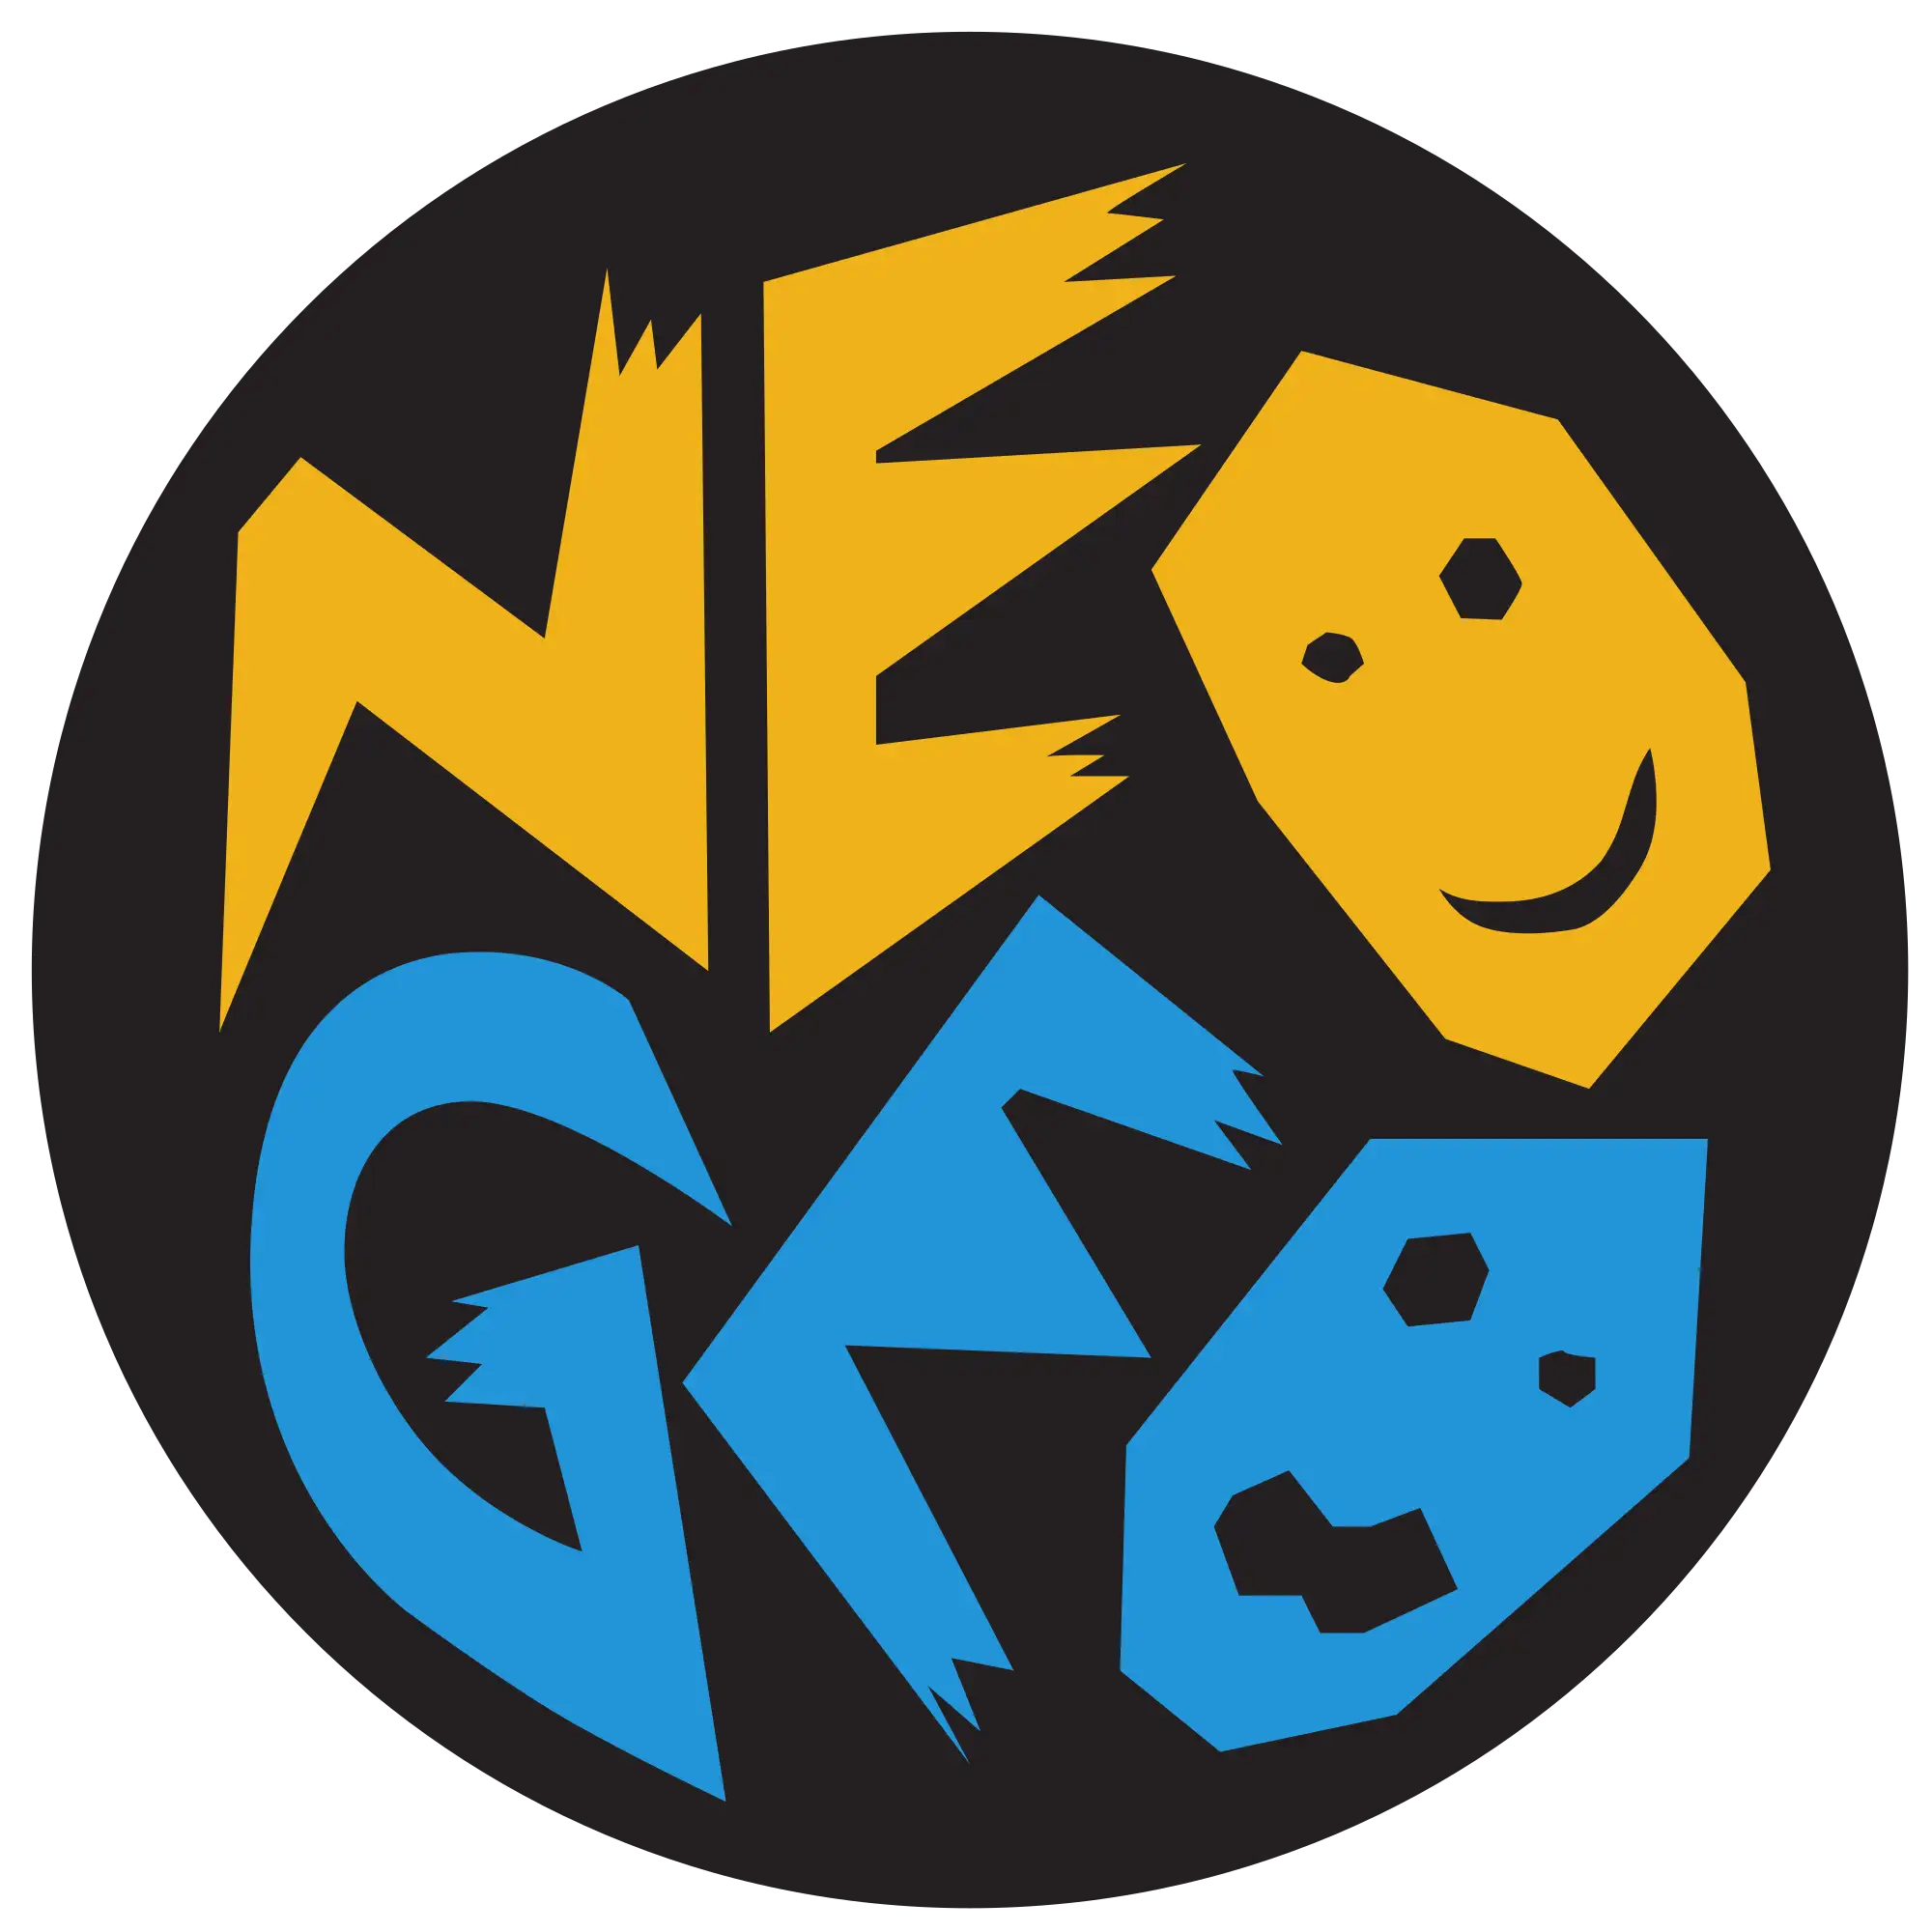 All Neo Geo CD games